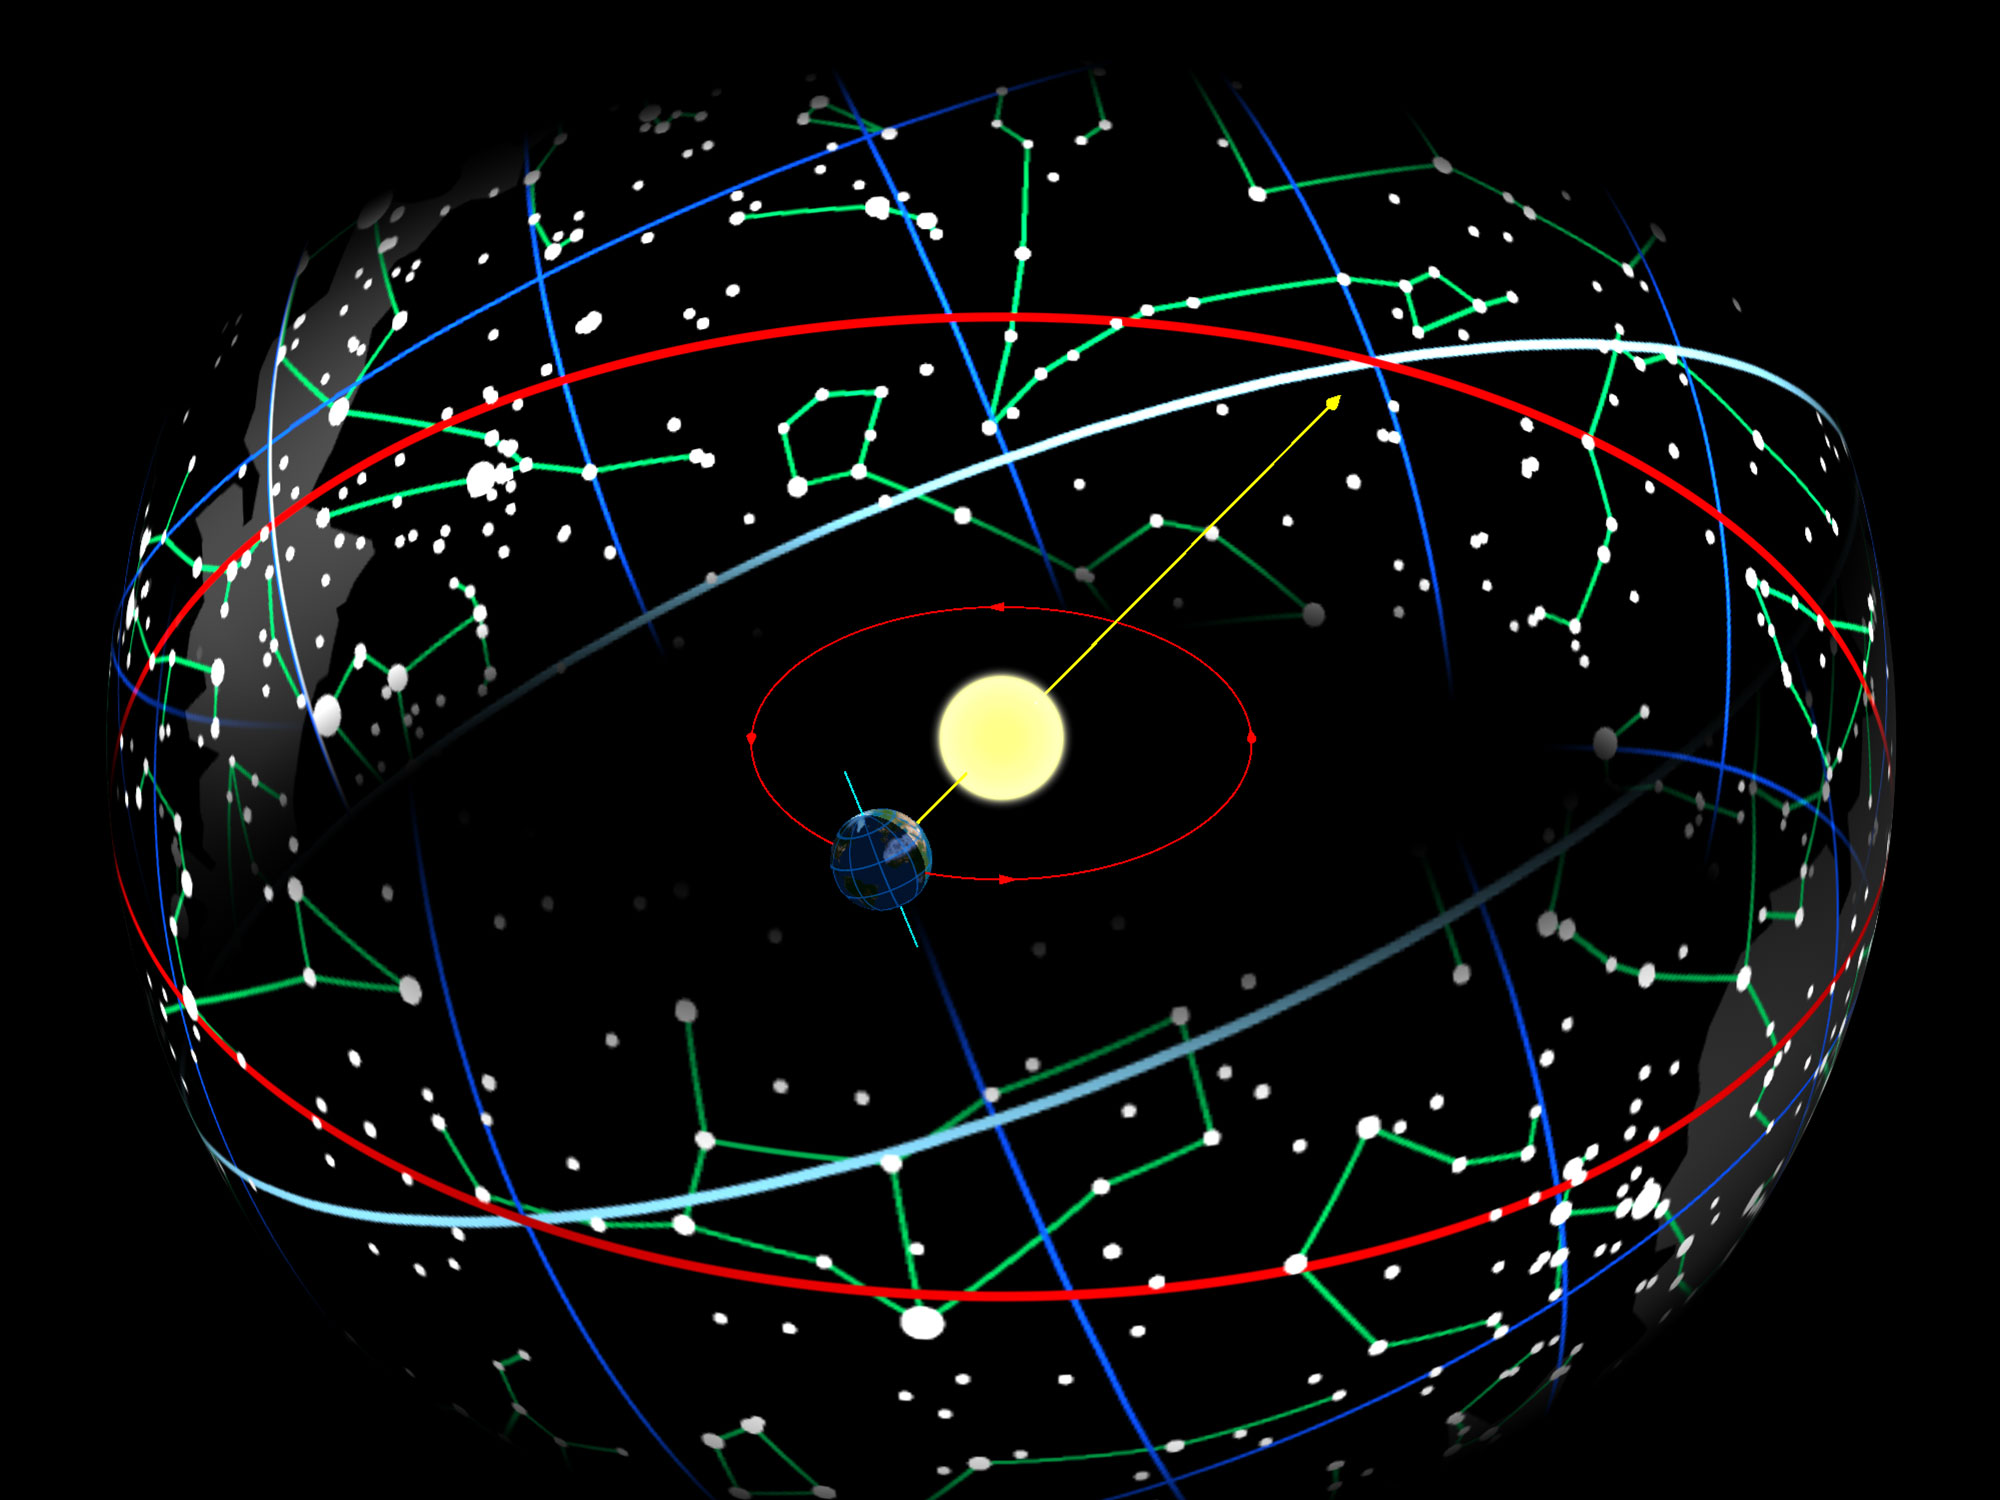 The Earth in its orbit around the Sun causes the Sun to appear on the celestial sphere moving along the ecliptic (red circle), which is tilted 23.44° with respect to the celestial equator (blue-white).